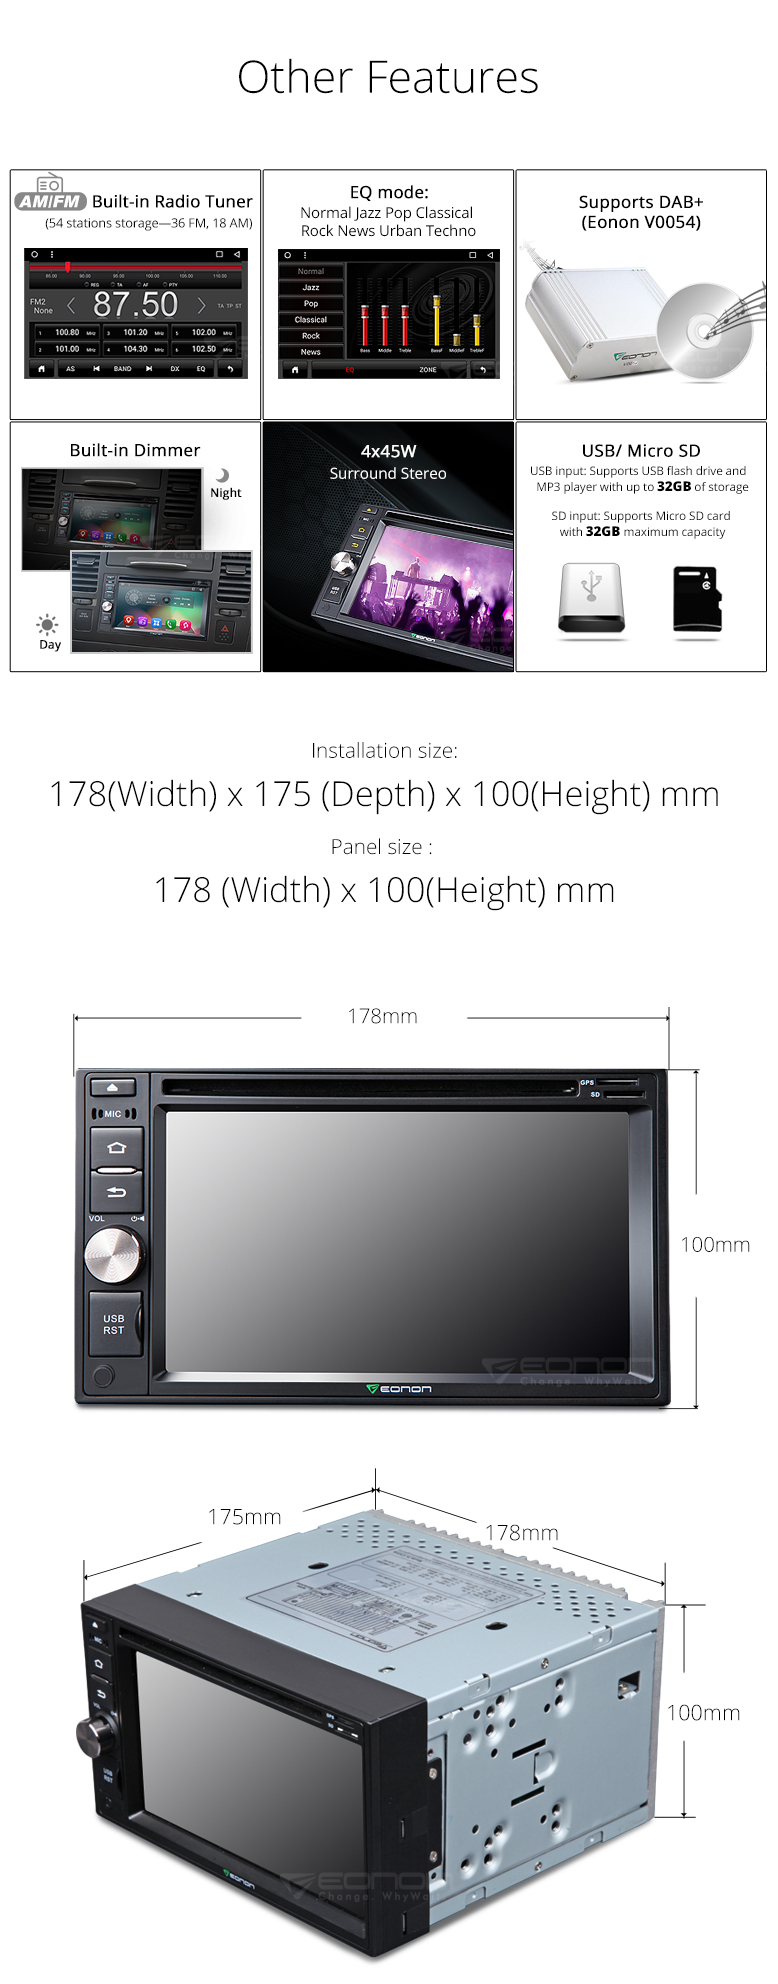 best android car dvd,car dvd gps,android 2 din car stereo